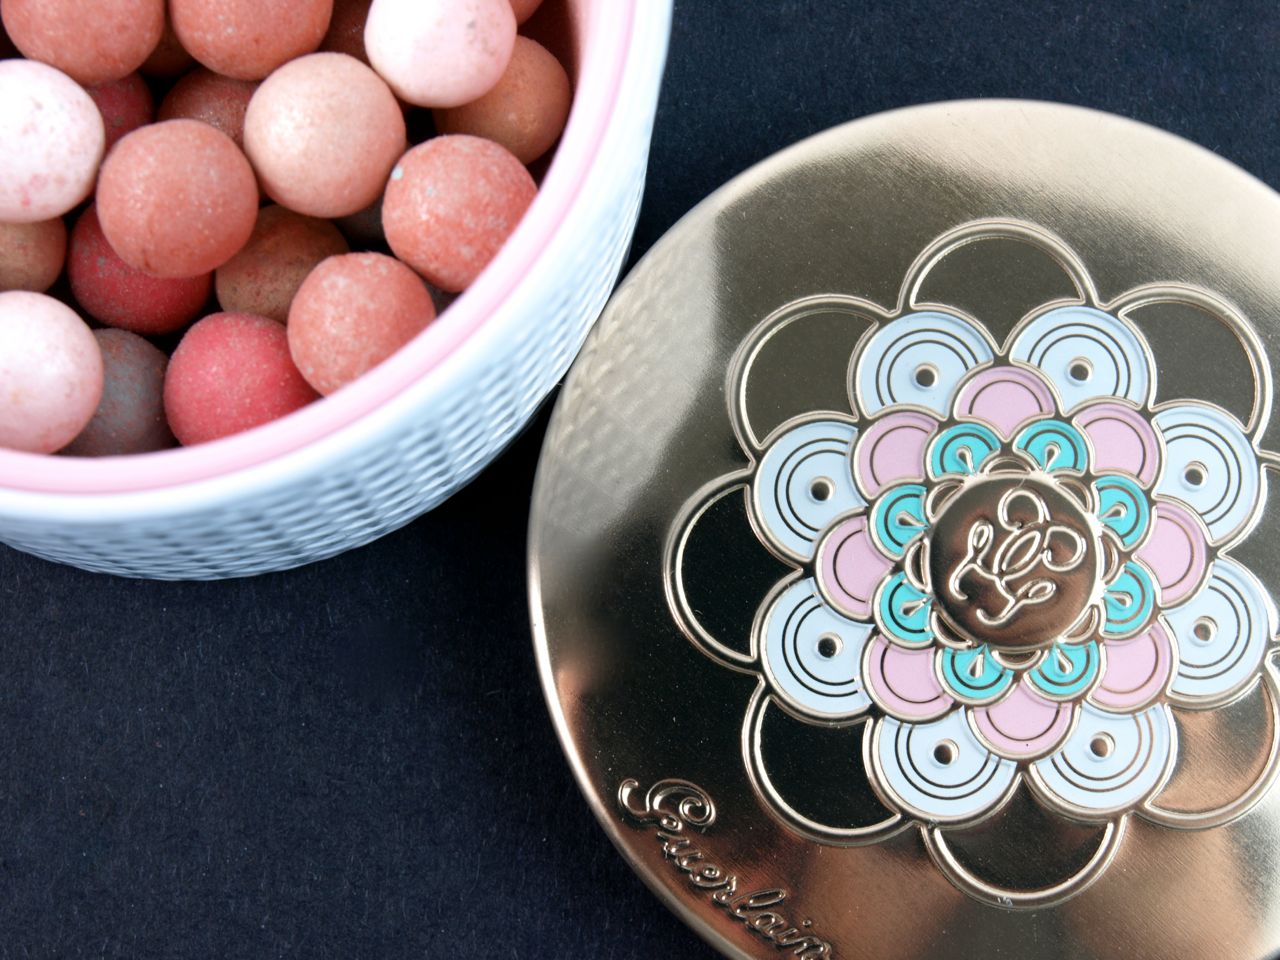 Guerlain Limited Edition Summer 2015 Meteorites Rainbow Pearls: Review and Swatches